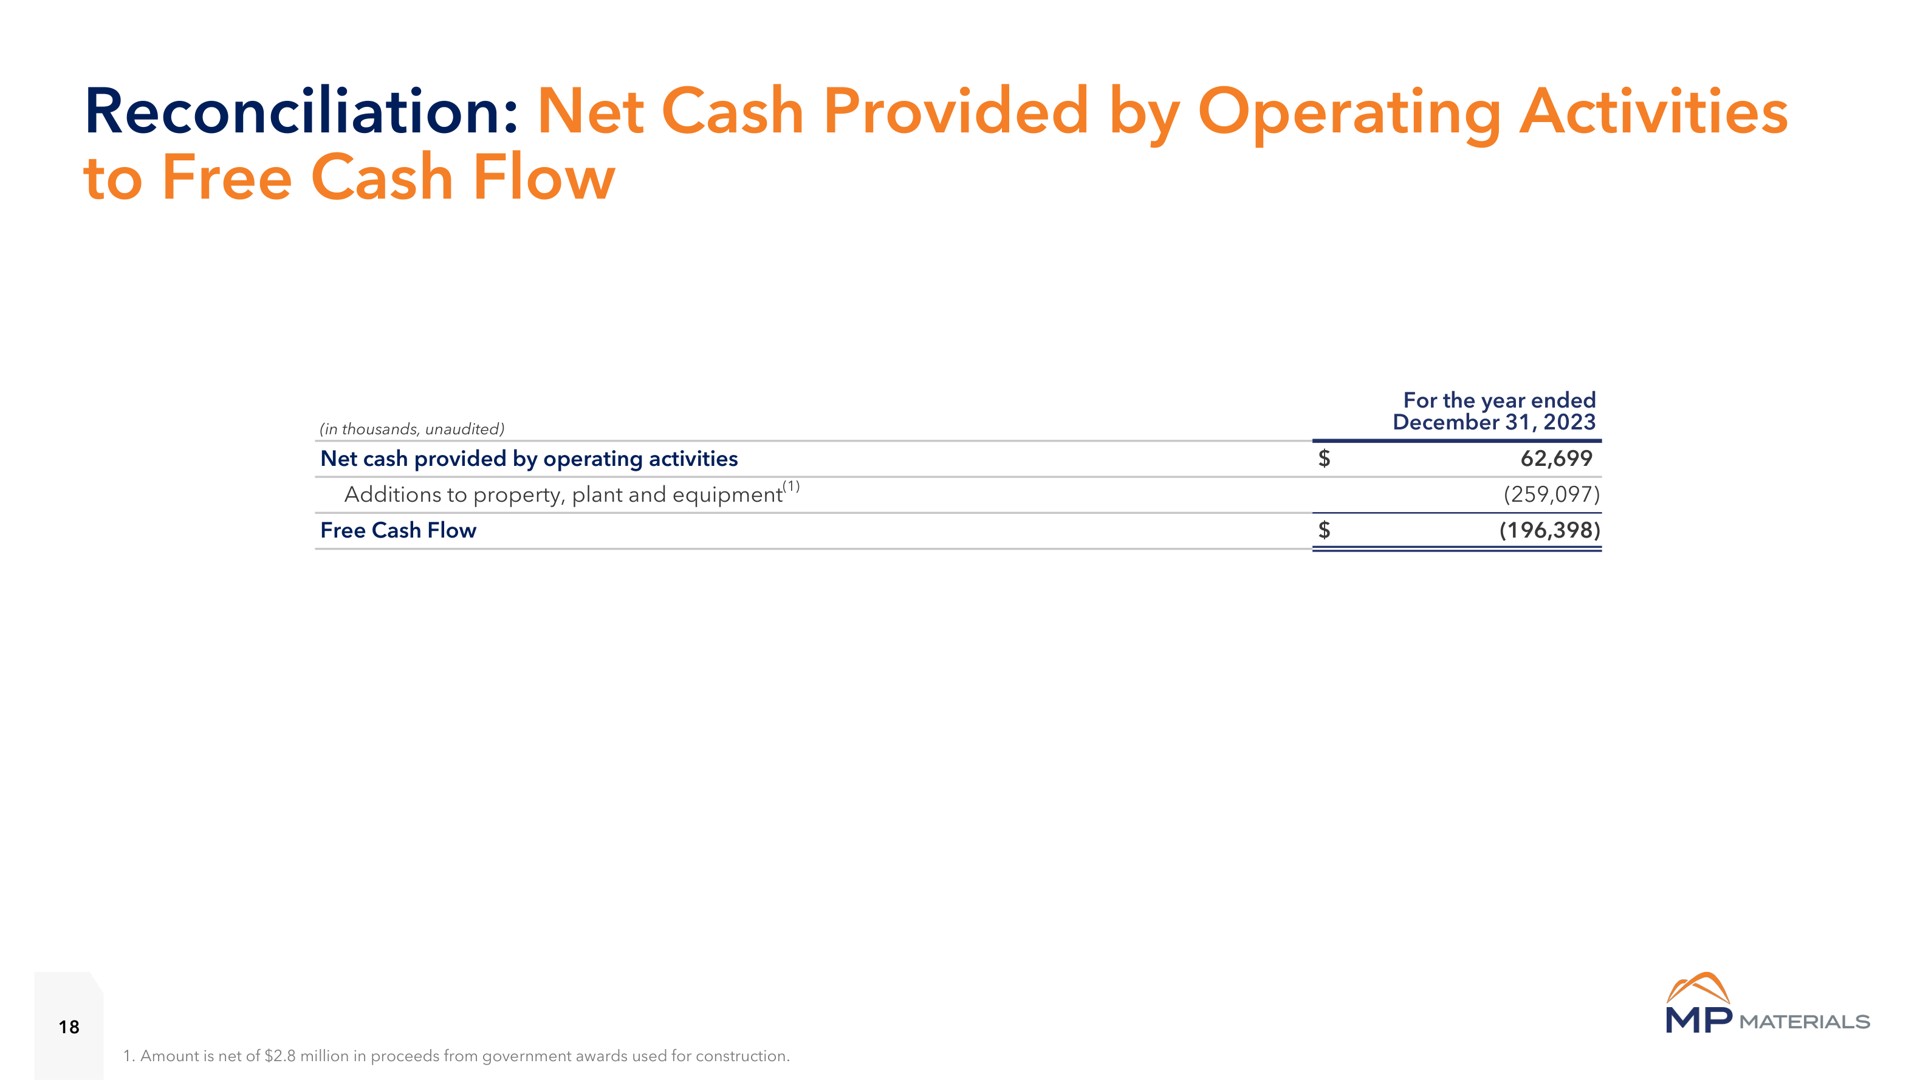 reconciliation net cash provided by operating activities to free cash flow lan | MP Materials